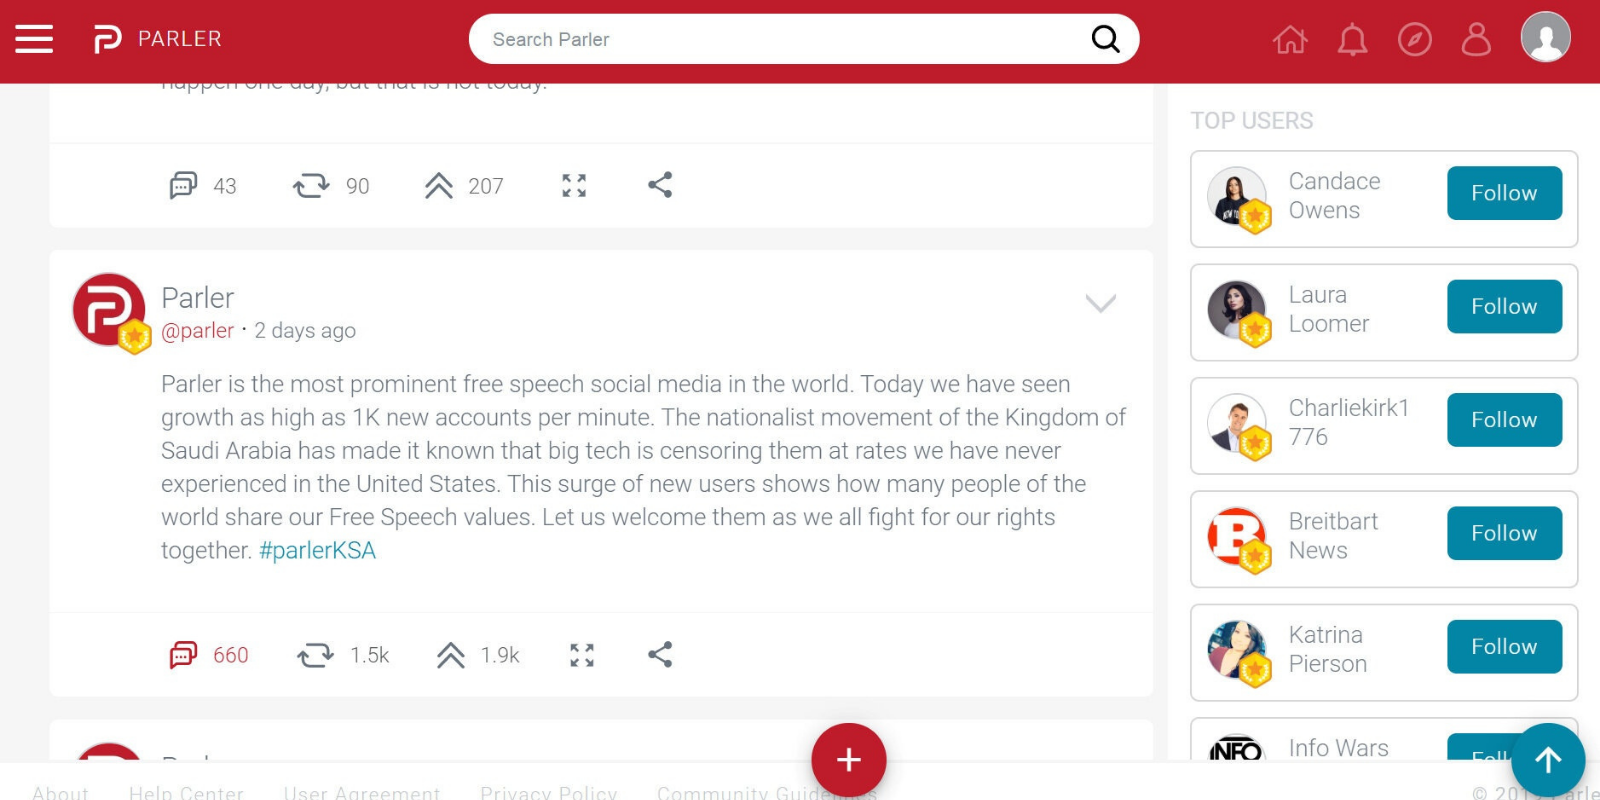 BREAKING: Apple threatens to remove Parler from its App Store | The Post Millennial